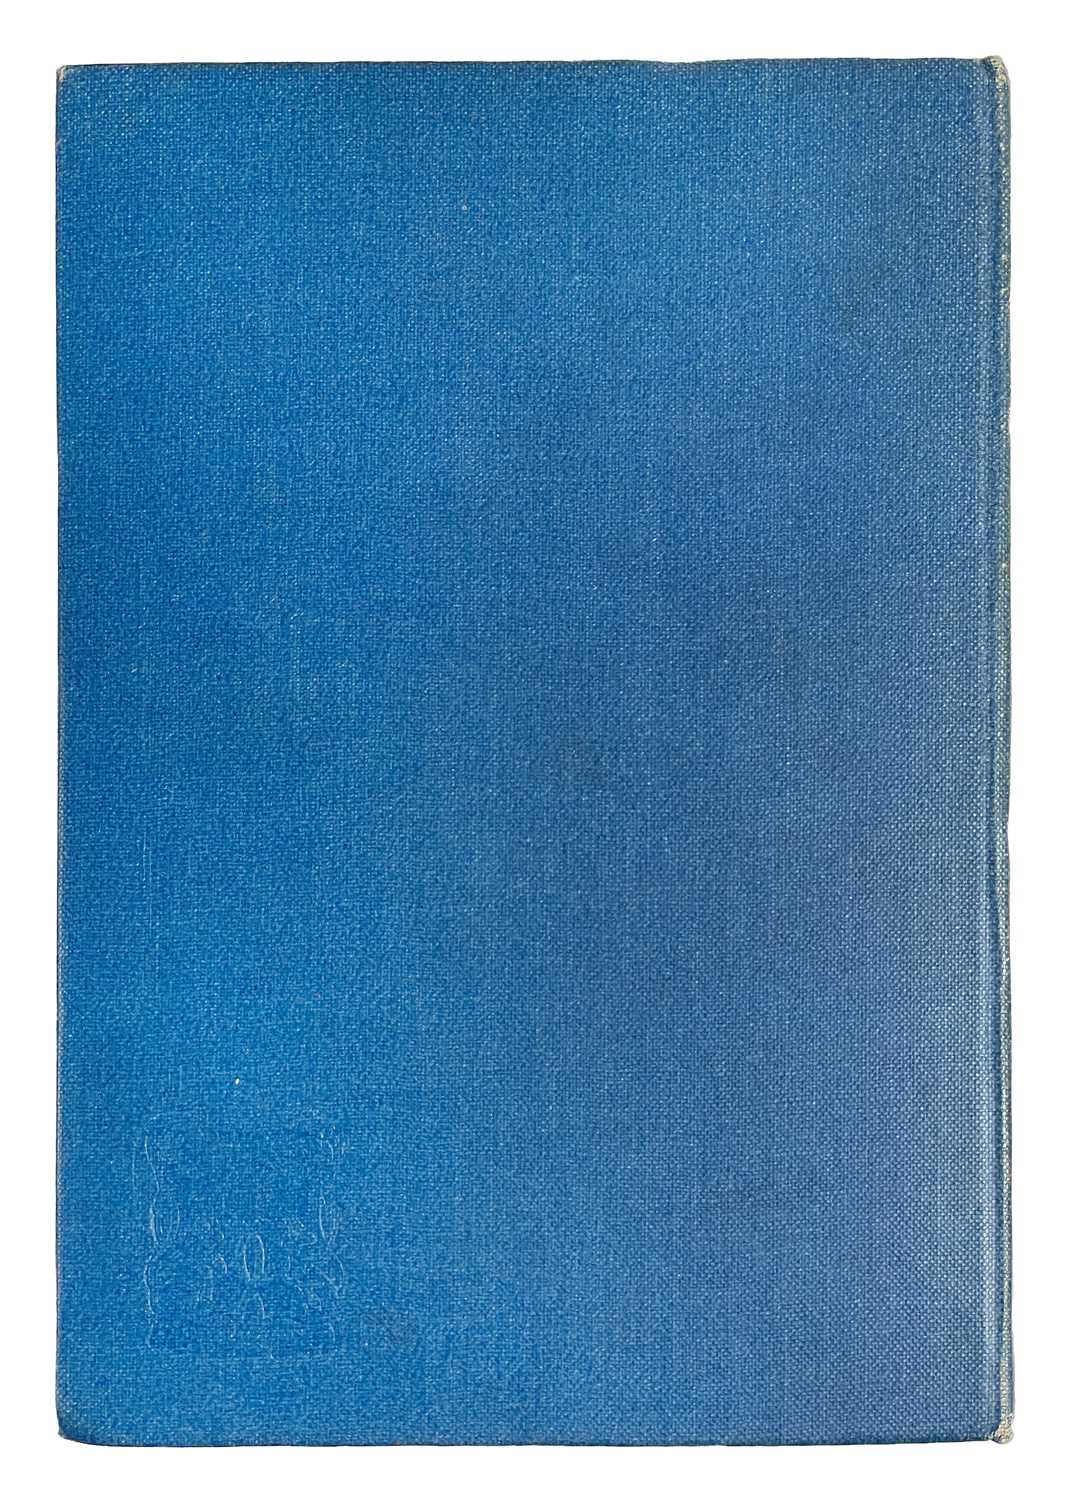 D. H. Lawrence 'The White Peacock,' - Image 8 of 8